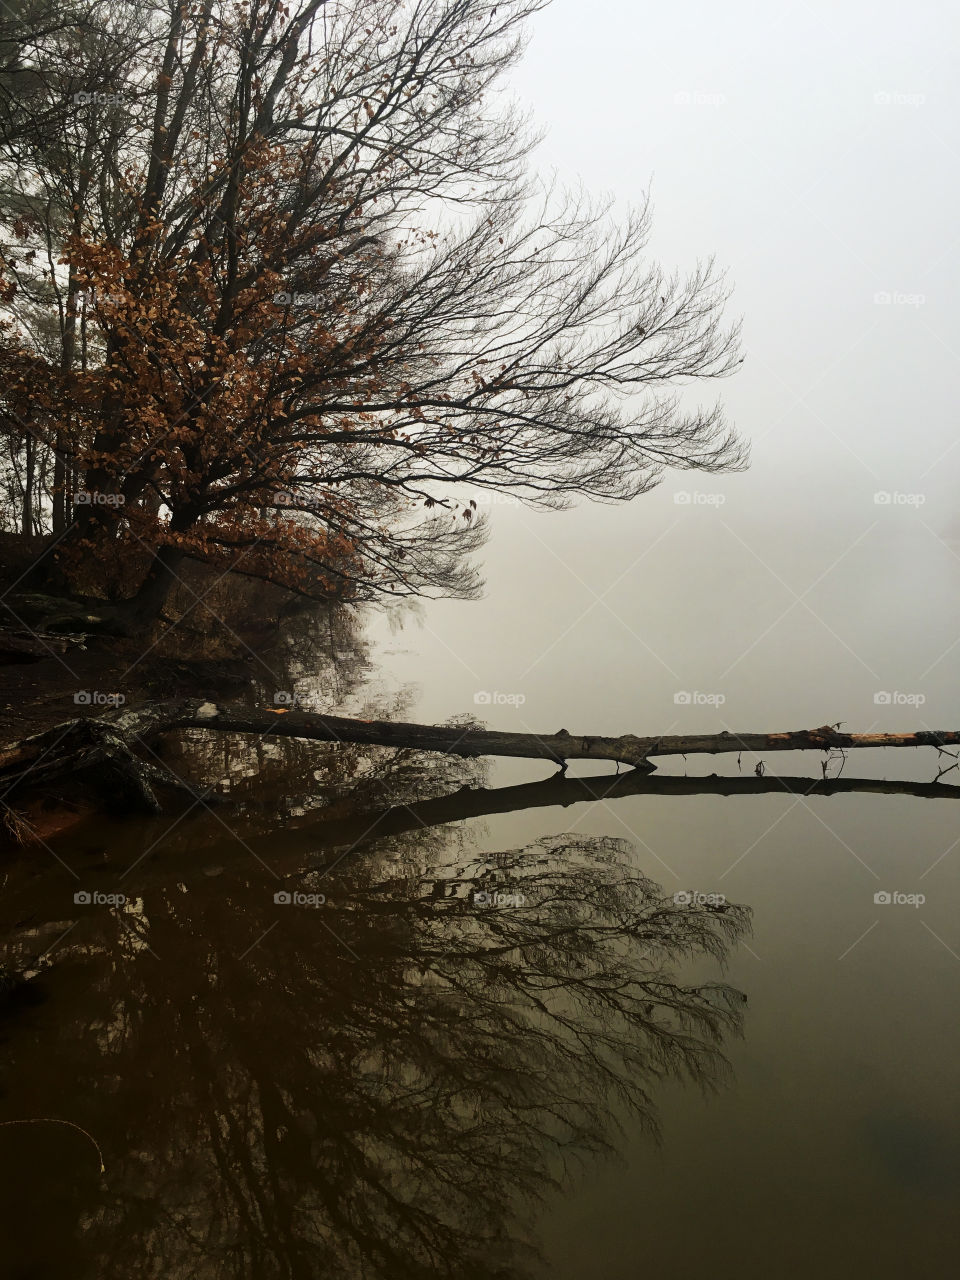 Beautiful reflections of tree branches and an old log on the calm still surface of the water at a lake in North Carolina on a foggy morning 